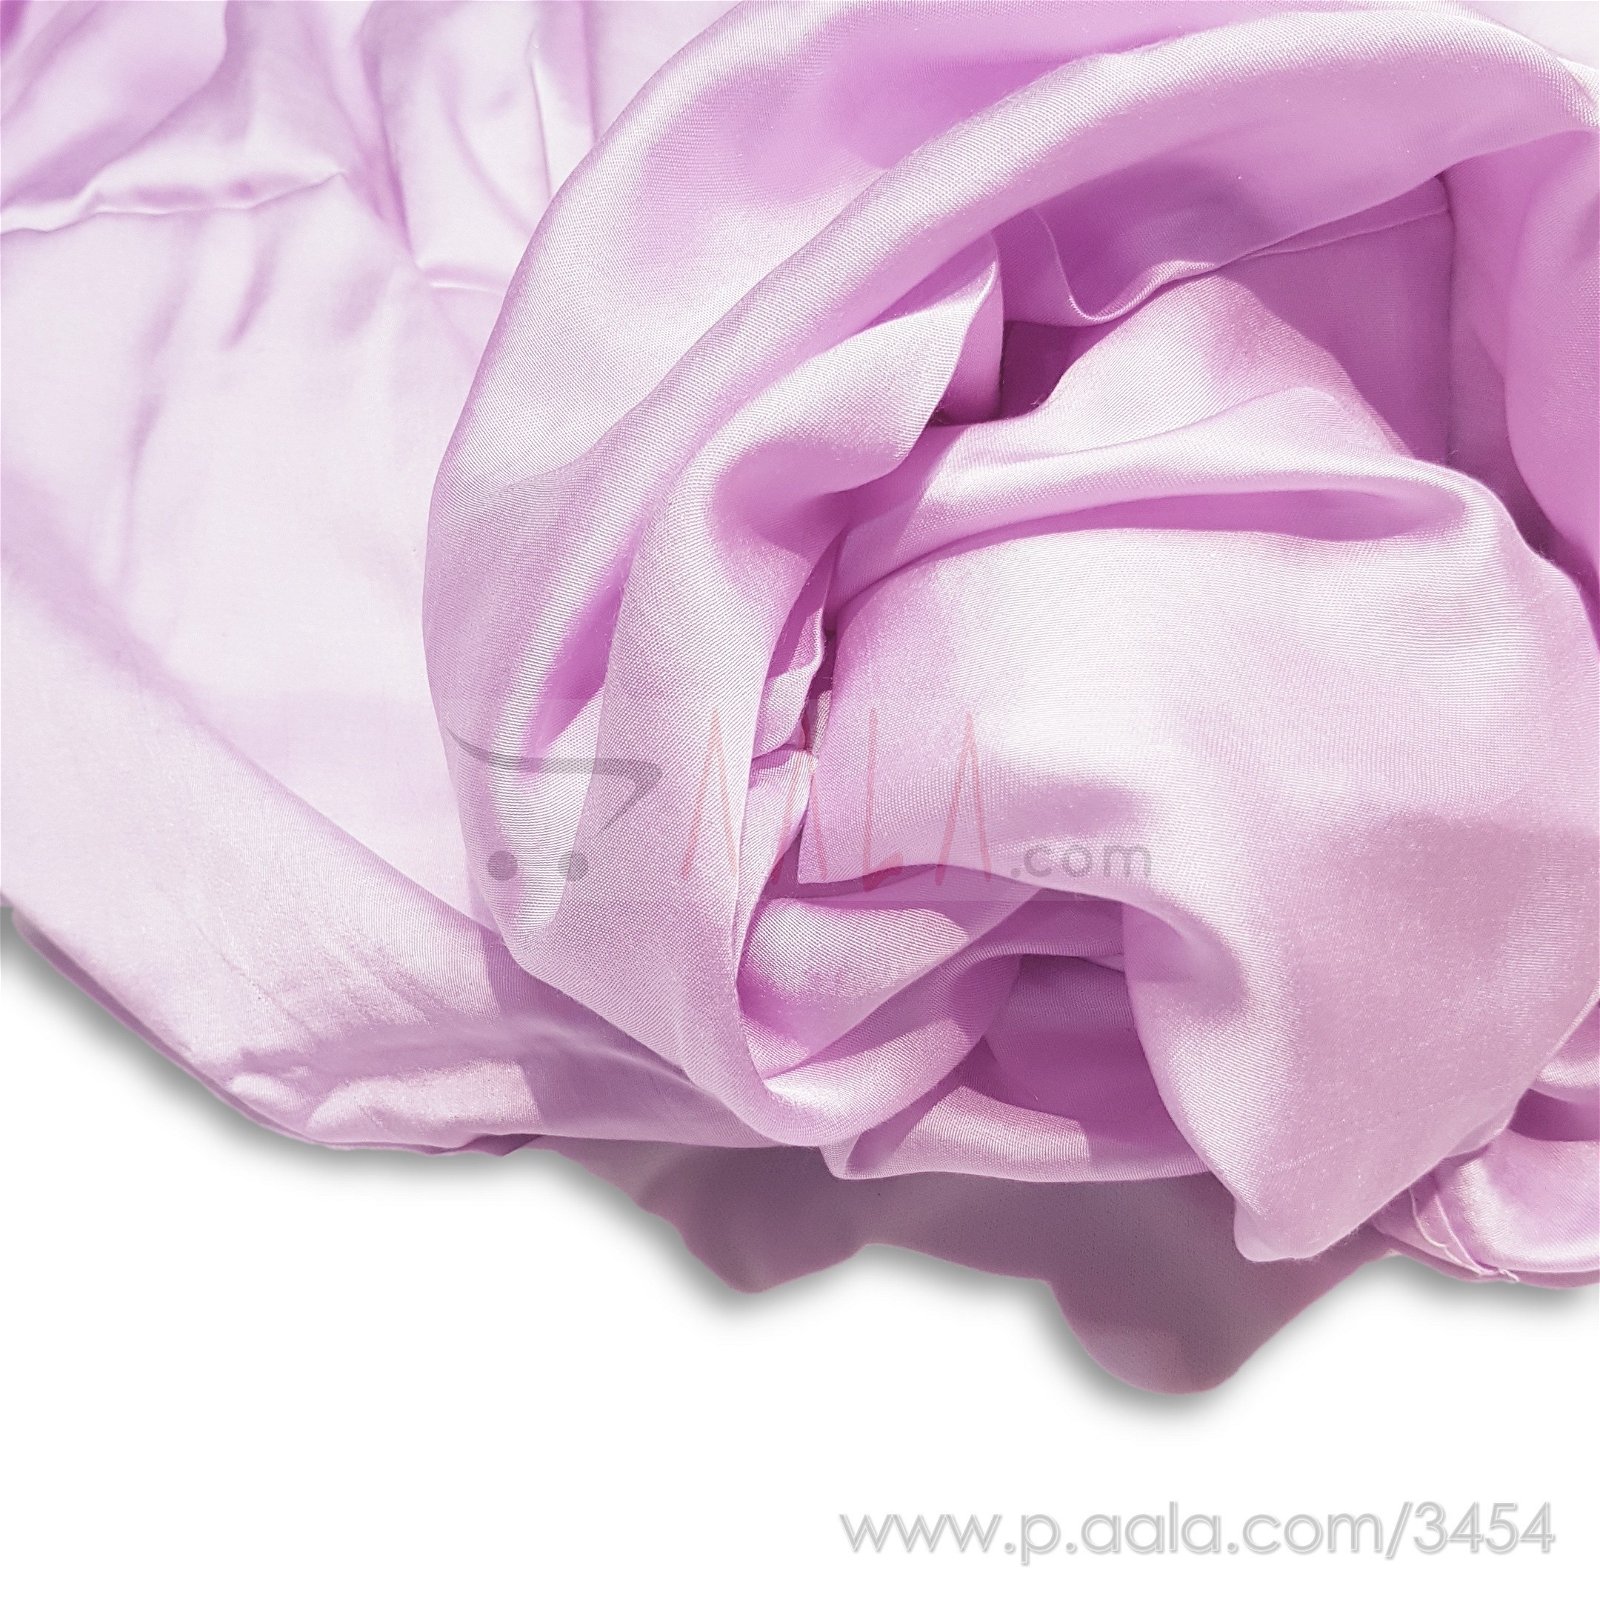 Modal Satin Viscose 44 Inches Dyed Per Metre #3454